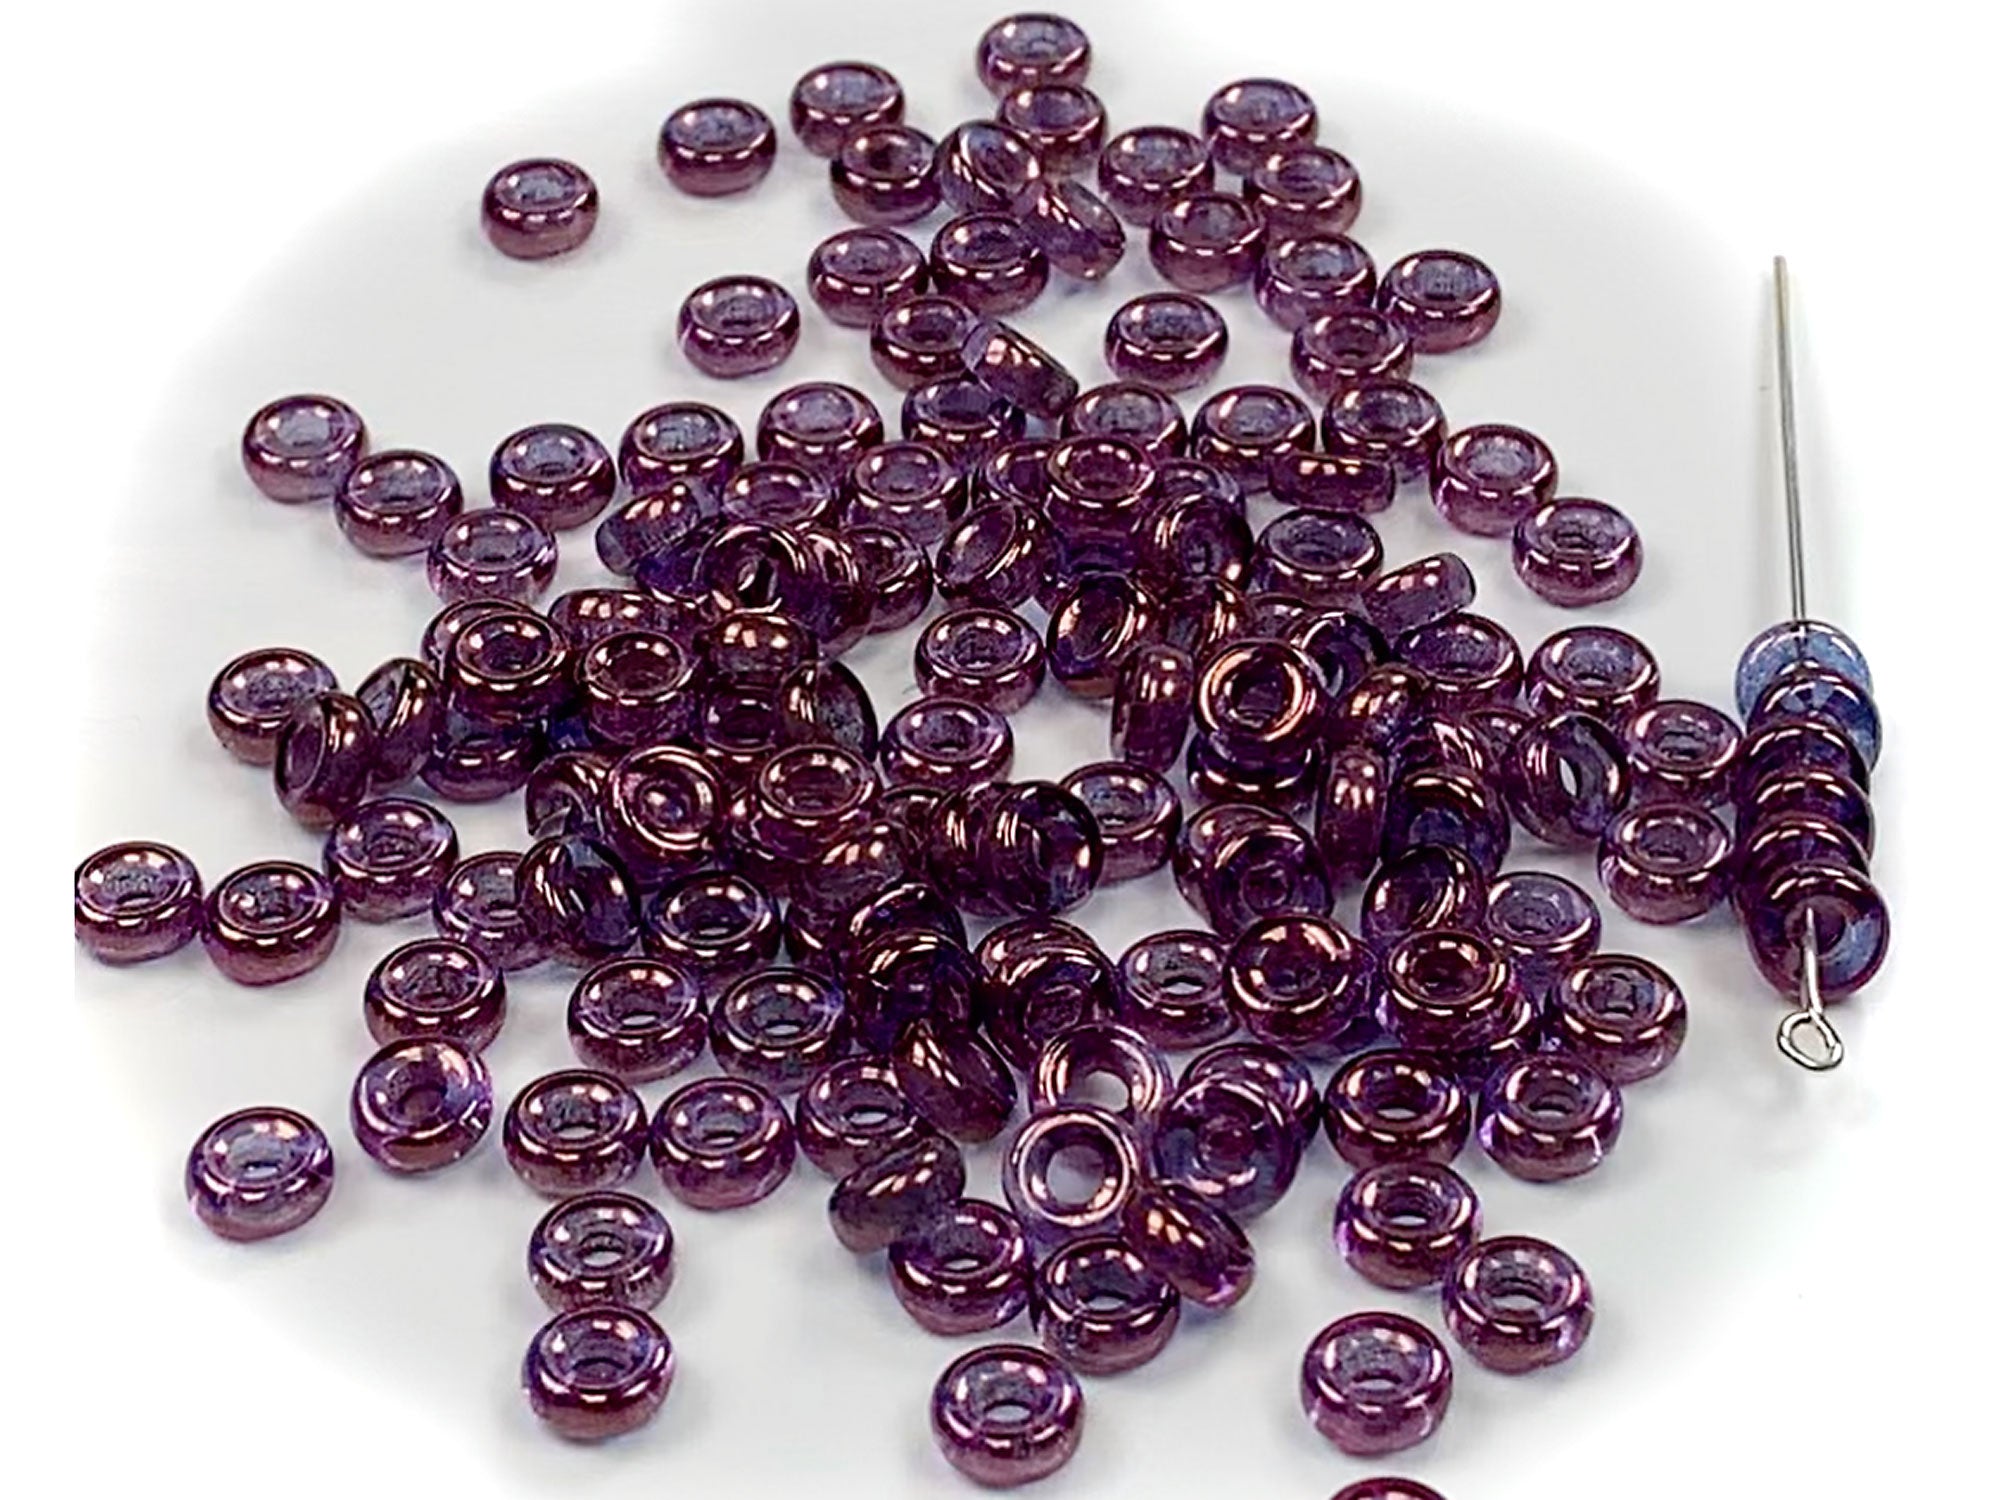 Czech Glass Druk Beads in size 3x6mm, Smooth Ring, Crystal Violet Luster, 50pcs, P896